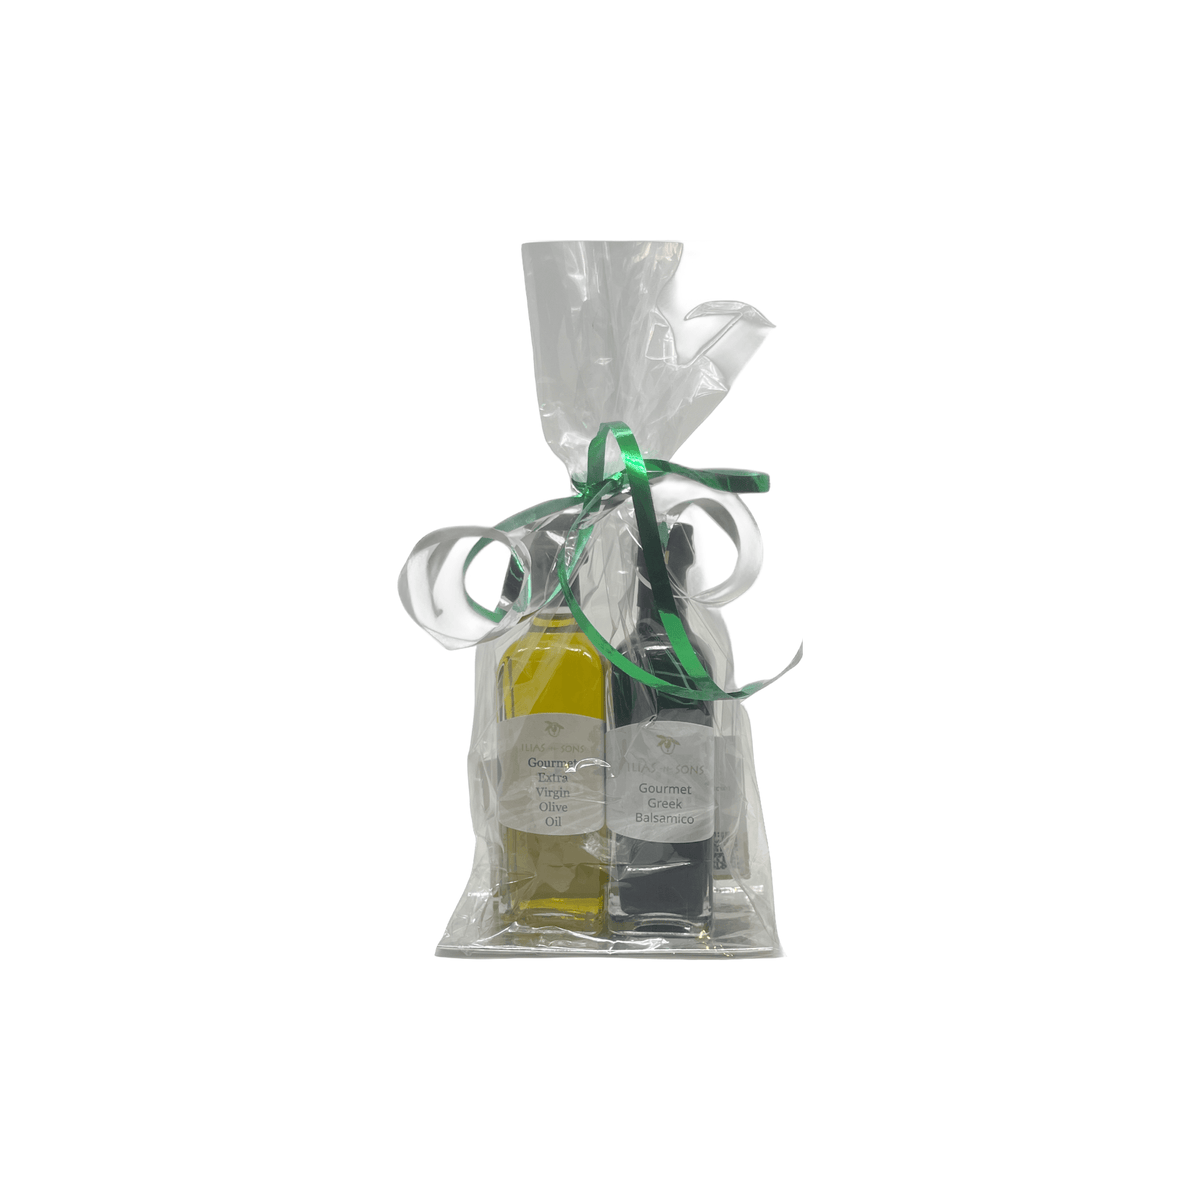 Gourmet Greek Extra Virgin Olive Oil and Balsamic Gift Sets